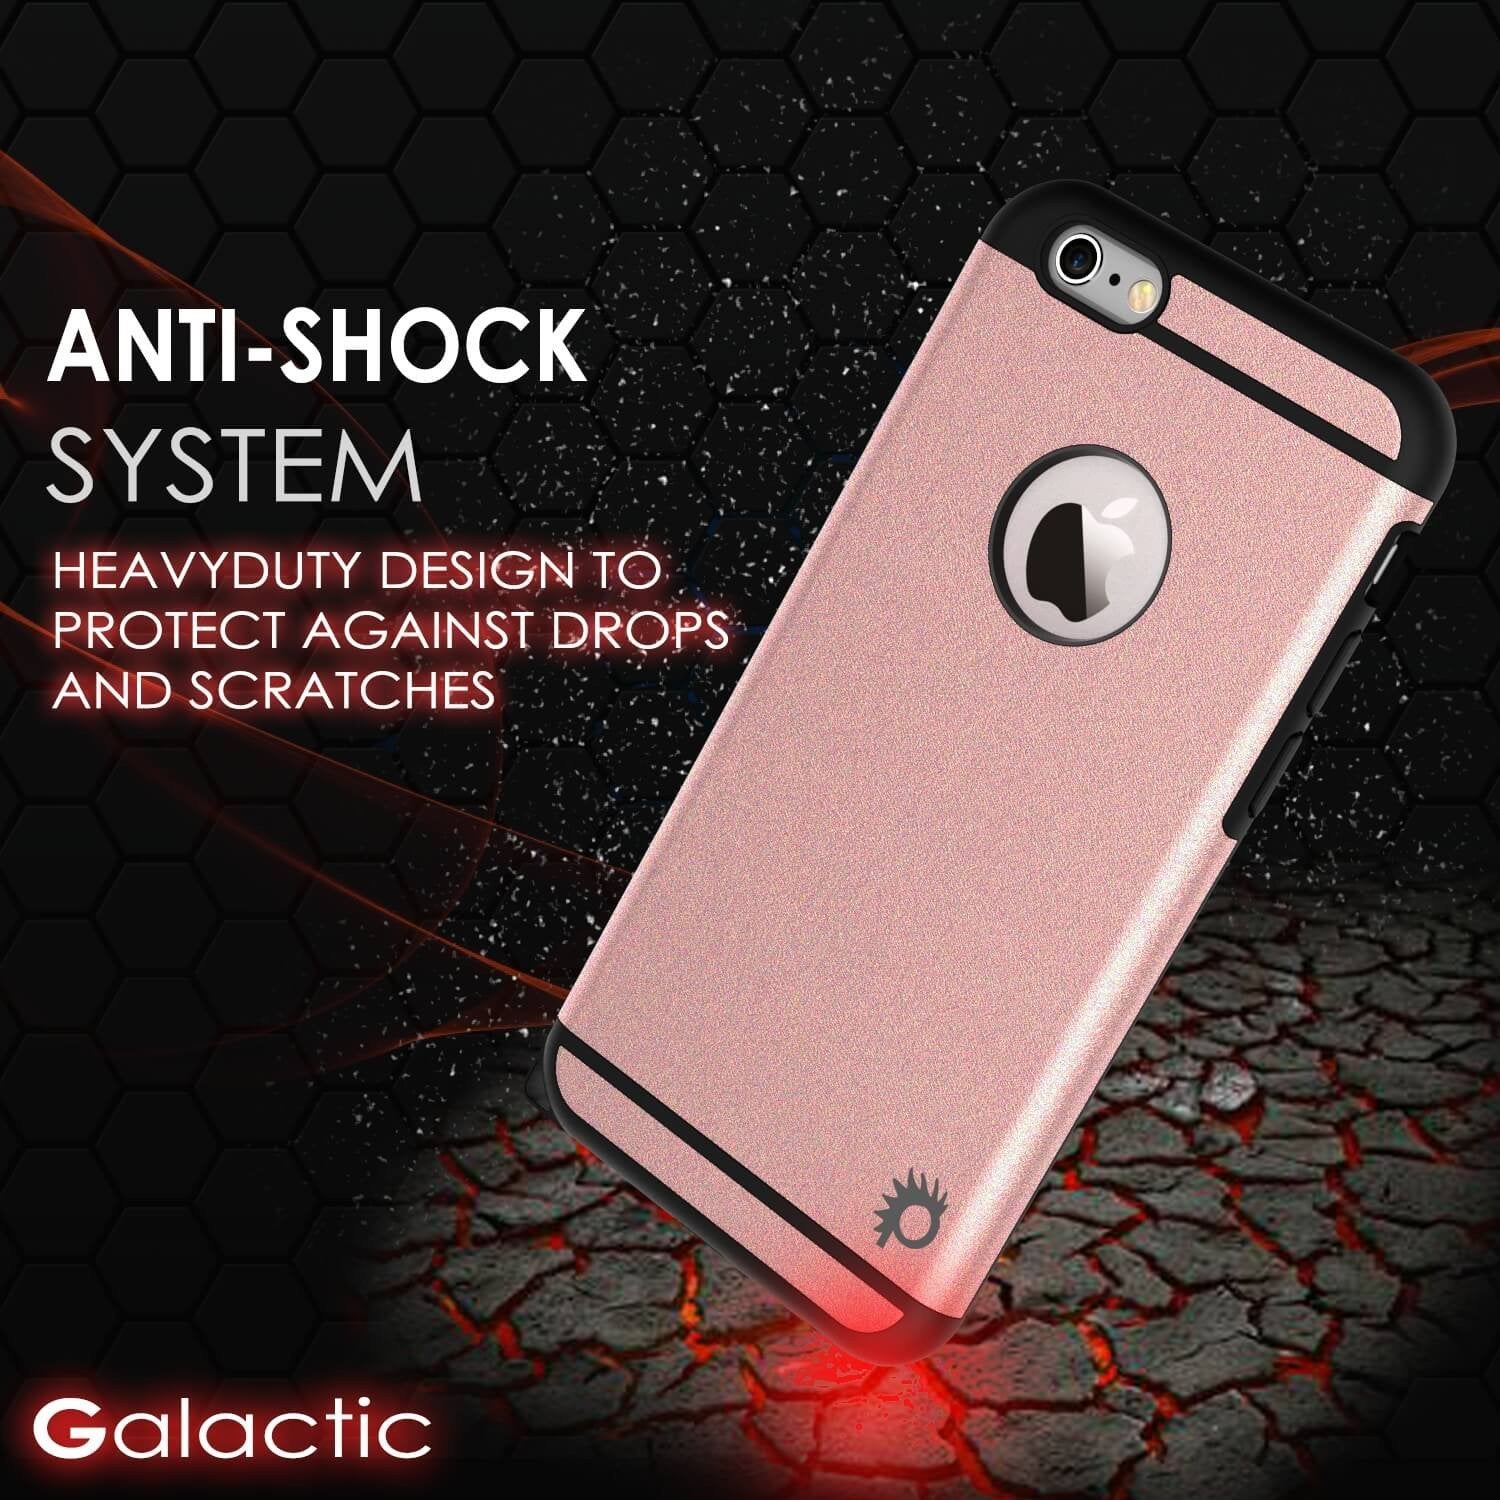 iPhone 5s/5 Case PunkCase Galactic black Series Slim w/ Tempered Glass | Lifetime Warranty